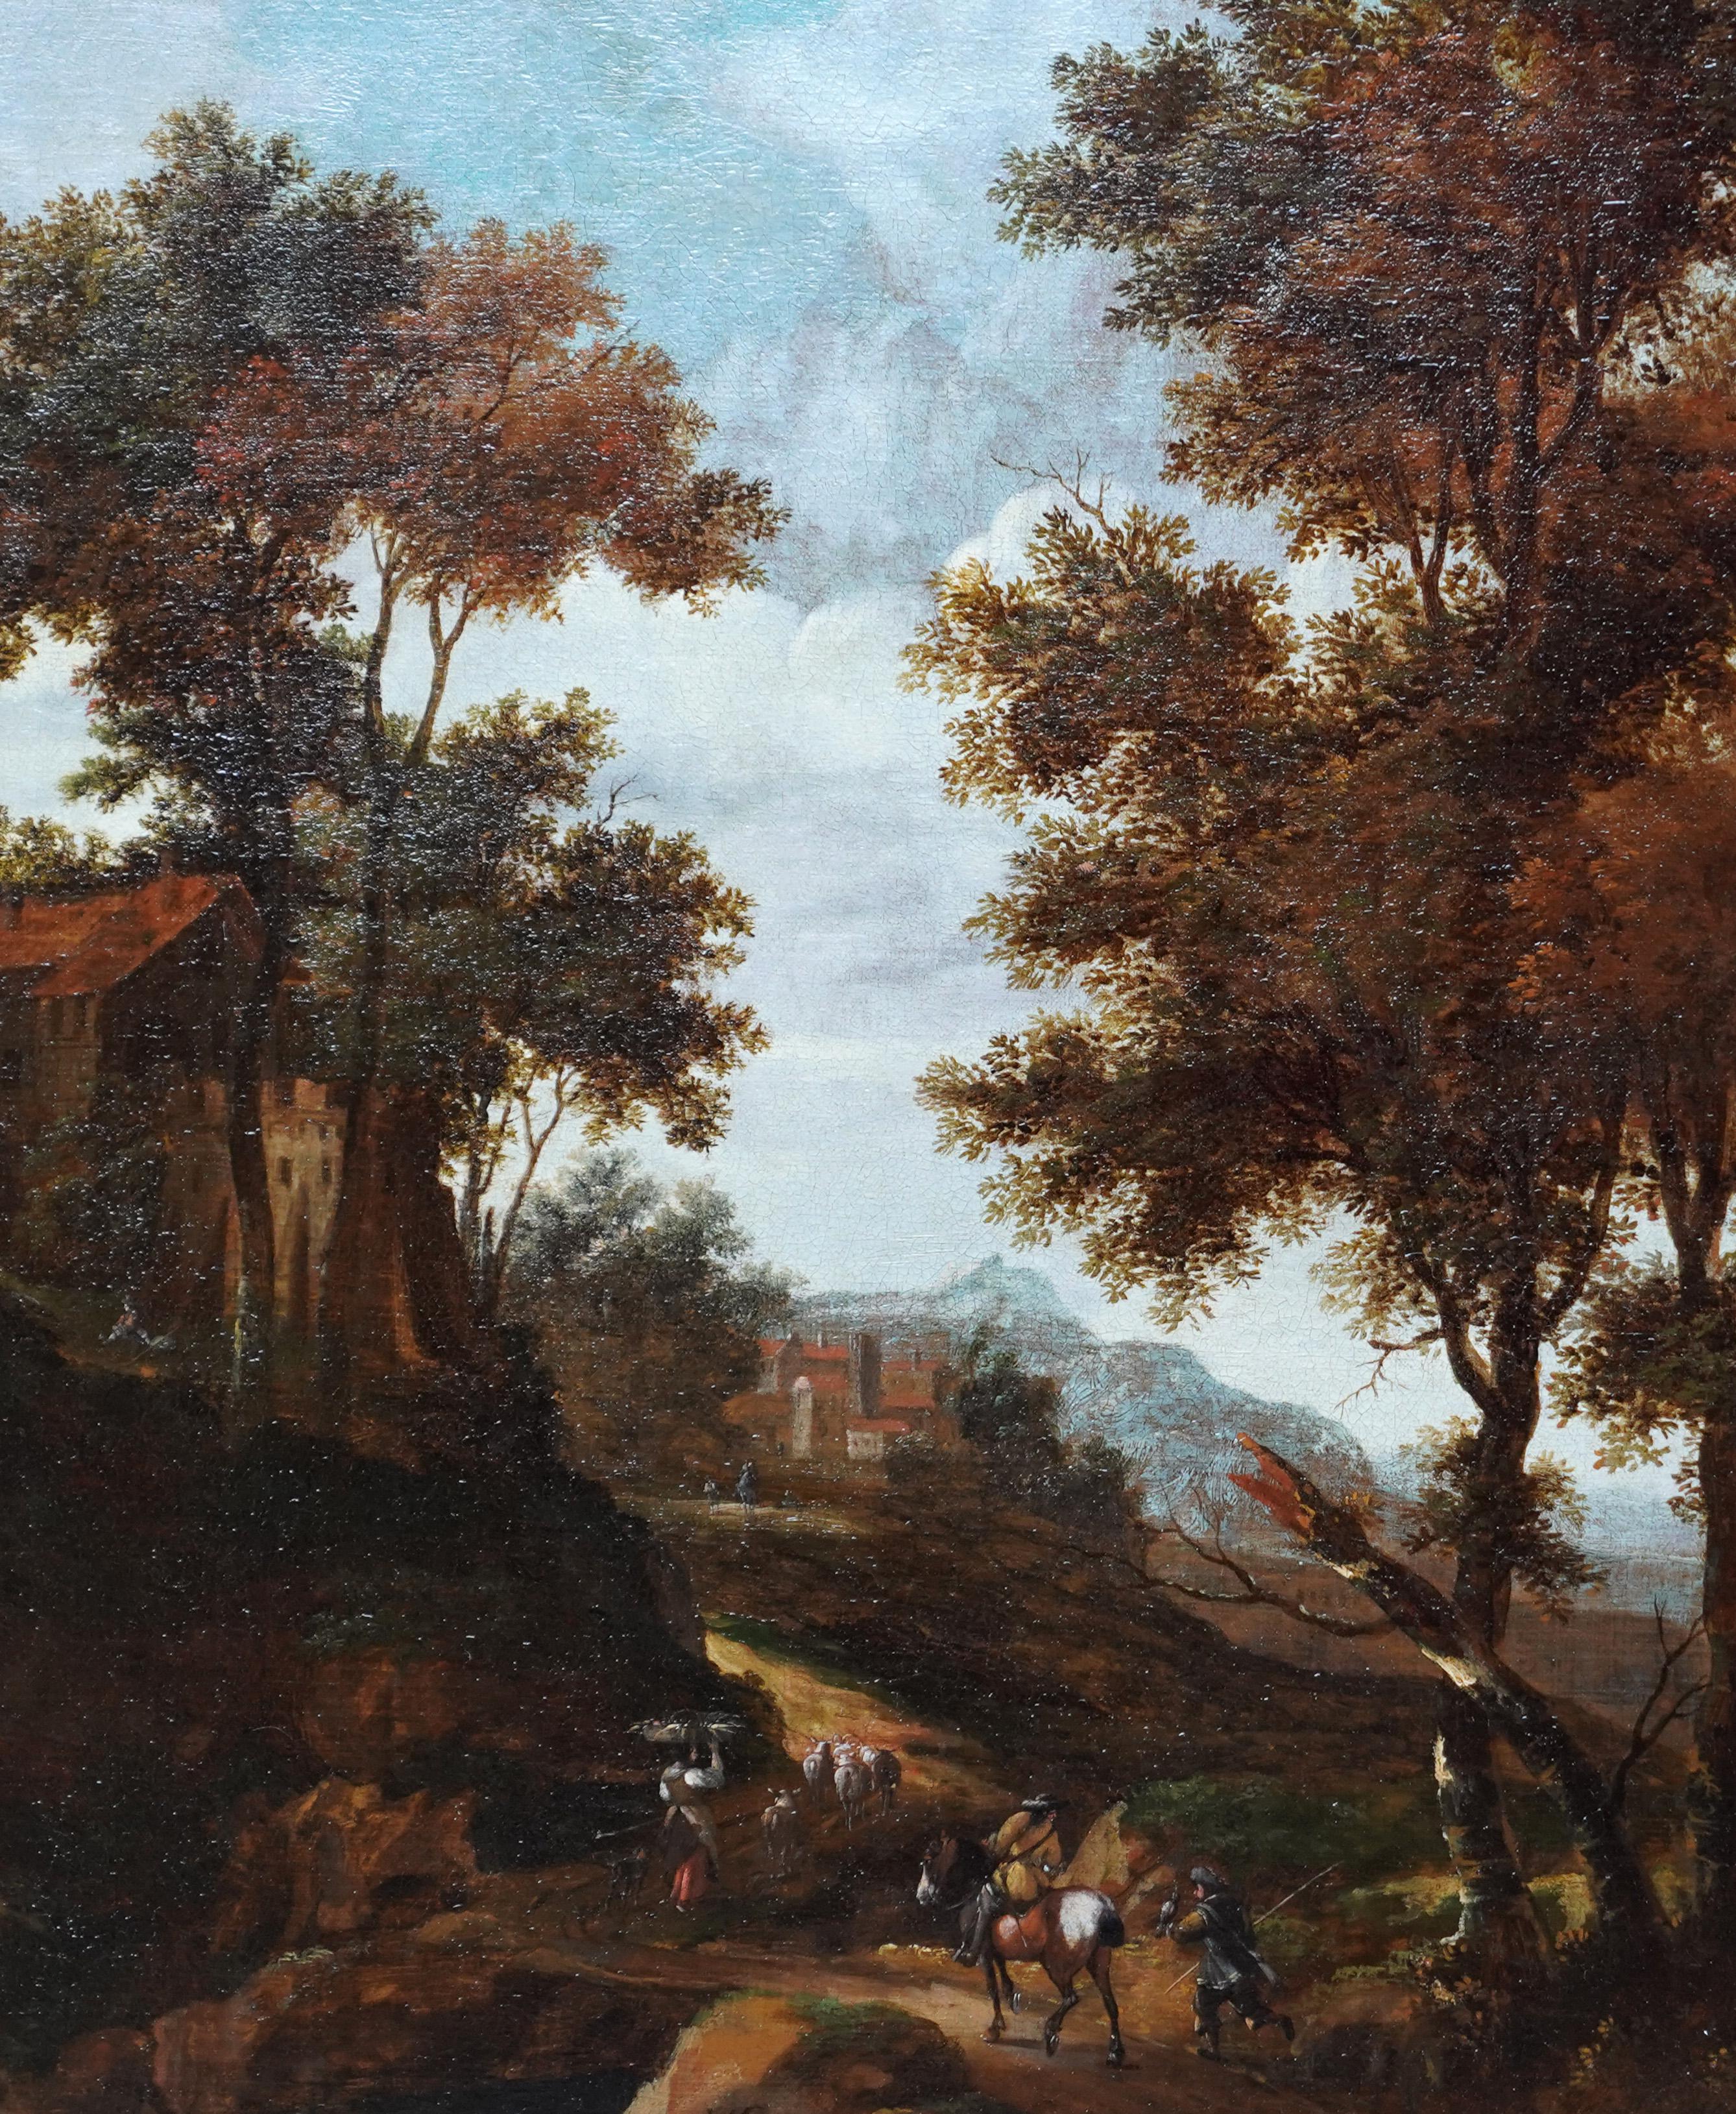 Italian Landscape with Travellers - Dutch Golden Age 17thC art oil painting - Old Masters Painting by Jacob van der Croos